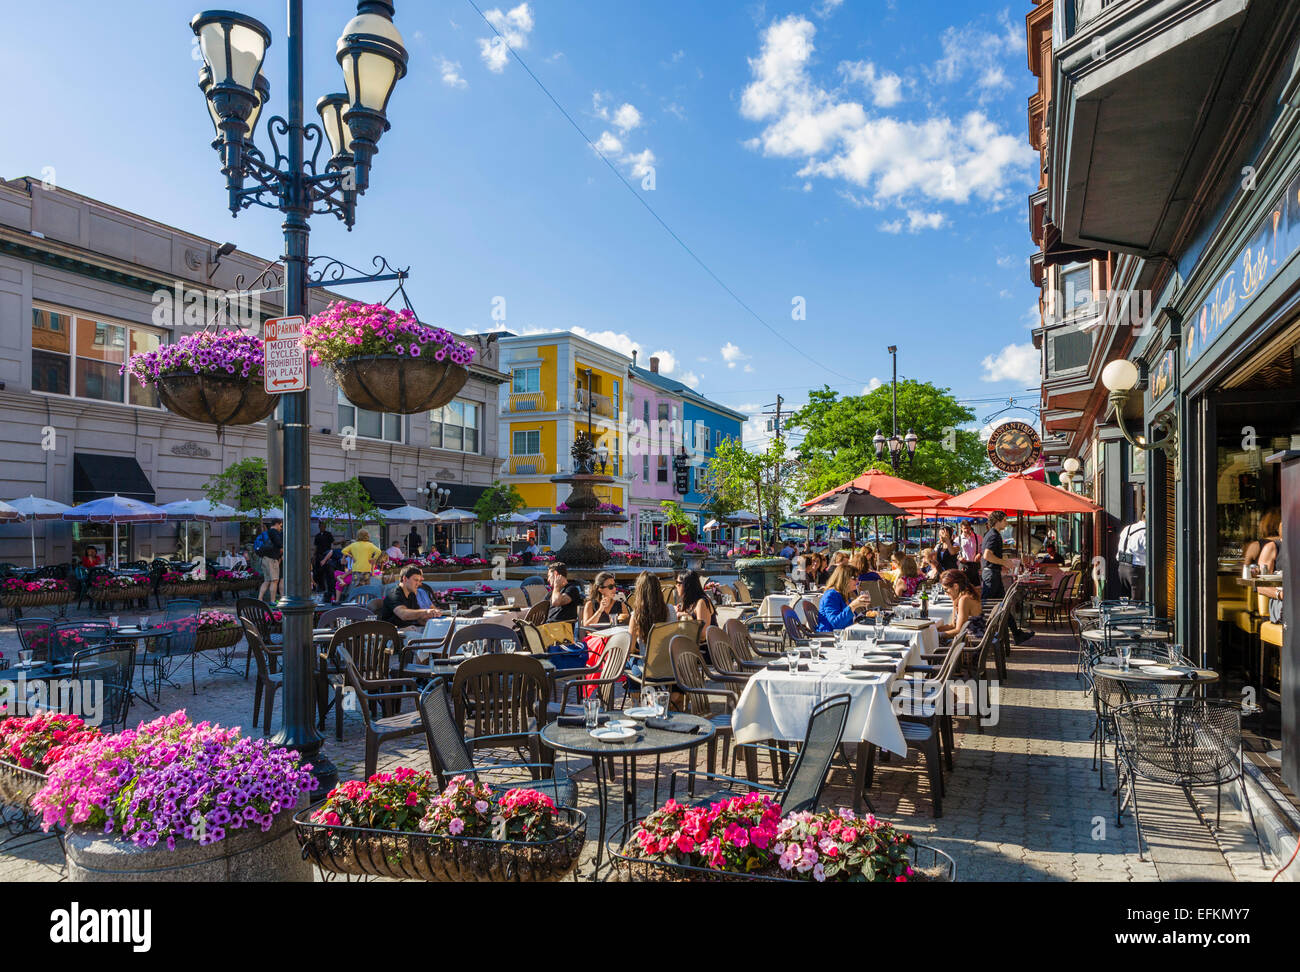 Restaurants auf DePasquale Square off Atwells Avenue, Federal Hill District, Providence, Rhode Island, USA Stockfoto